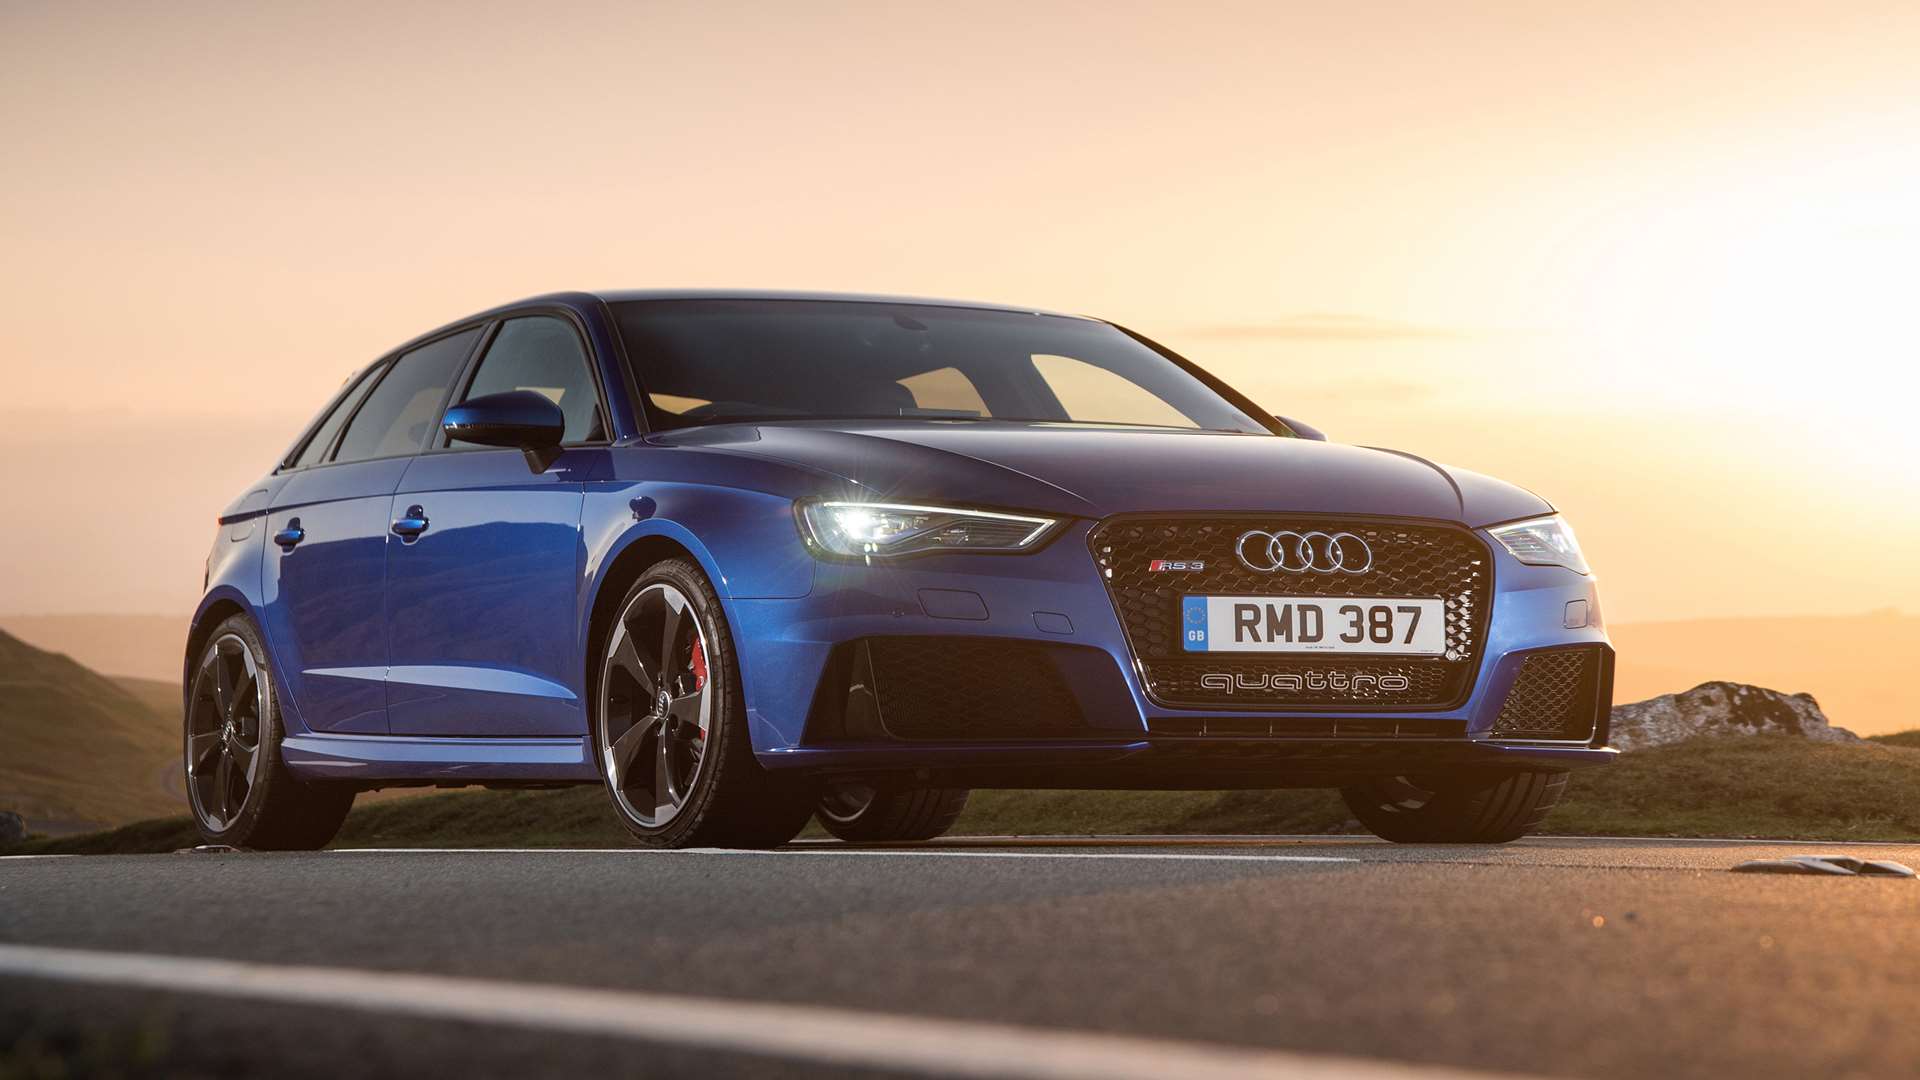 There are few clues to the RS3’s potential, aside from the badging, big fat oval exhausts and exclusive 19-inch alloy wheels squeezed into the flared wheel arches the rest of the exterior is understated